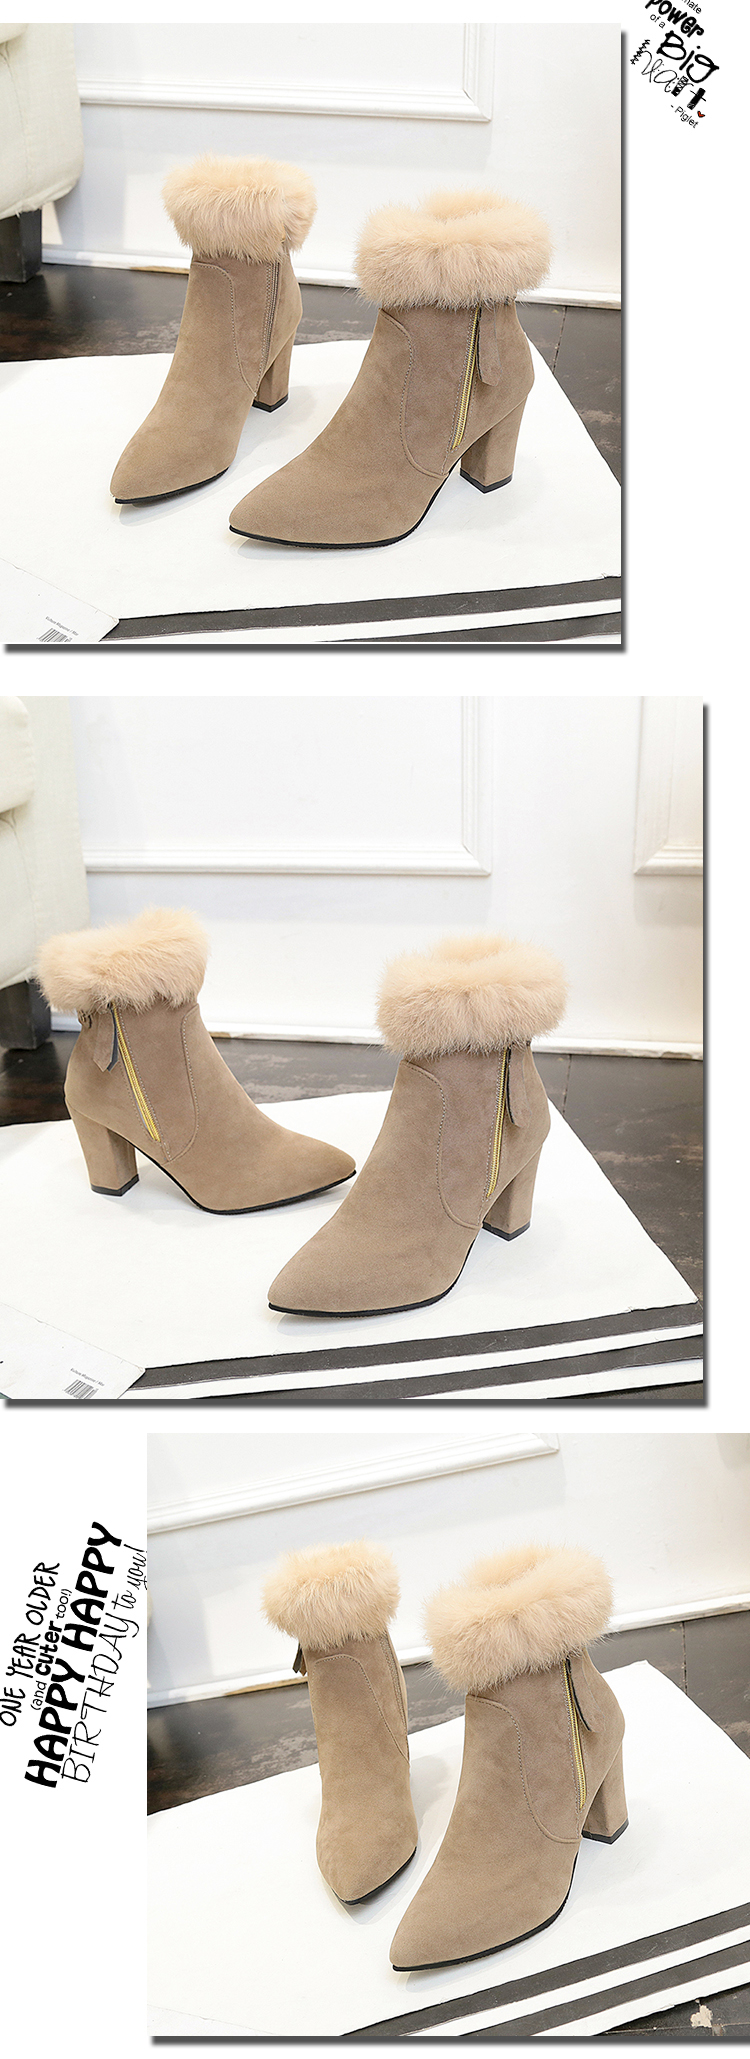 QZJR-009Short Boots Fashion Warm Fluffy Pointed Coarse High Heeled Women'S Shoes